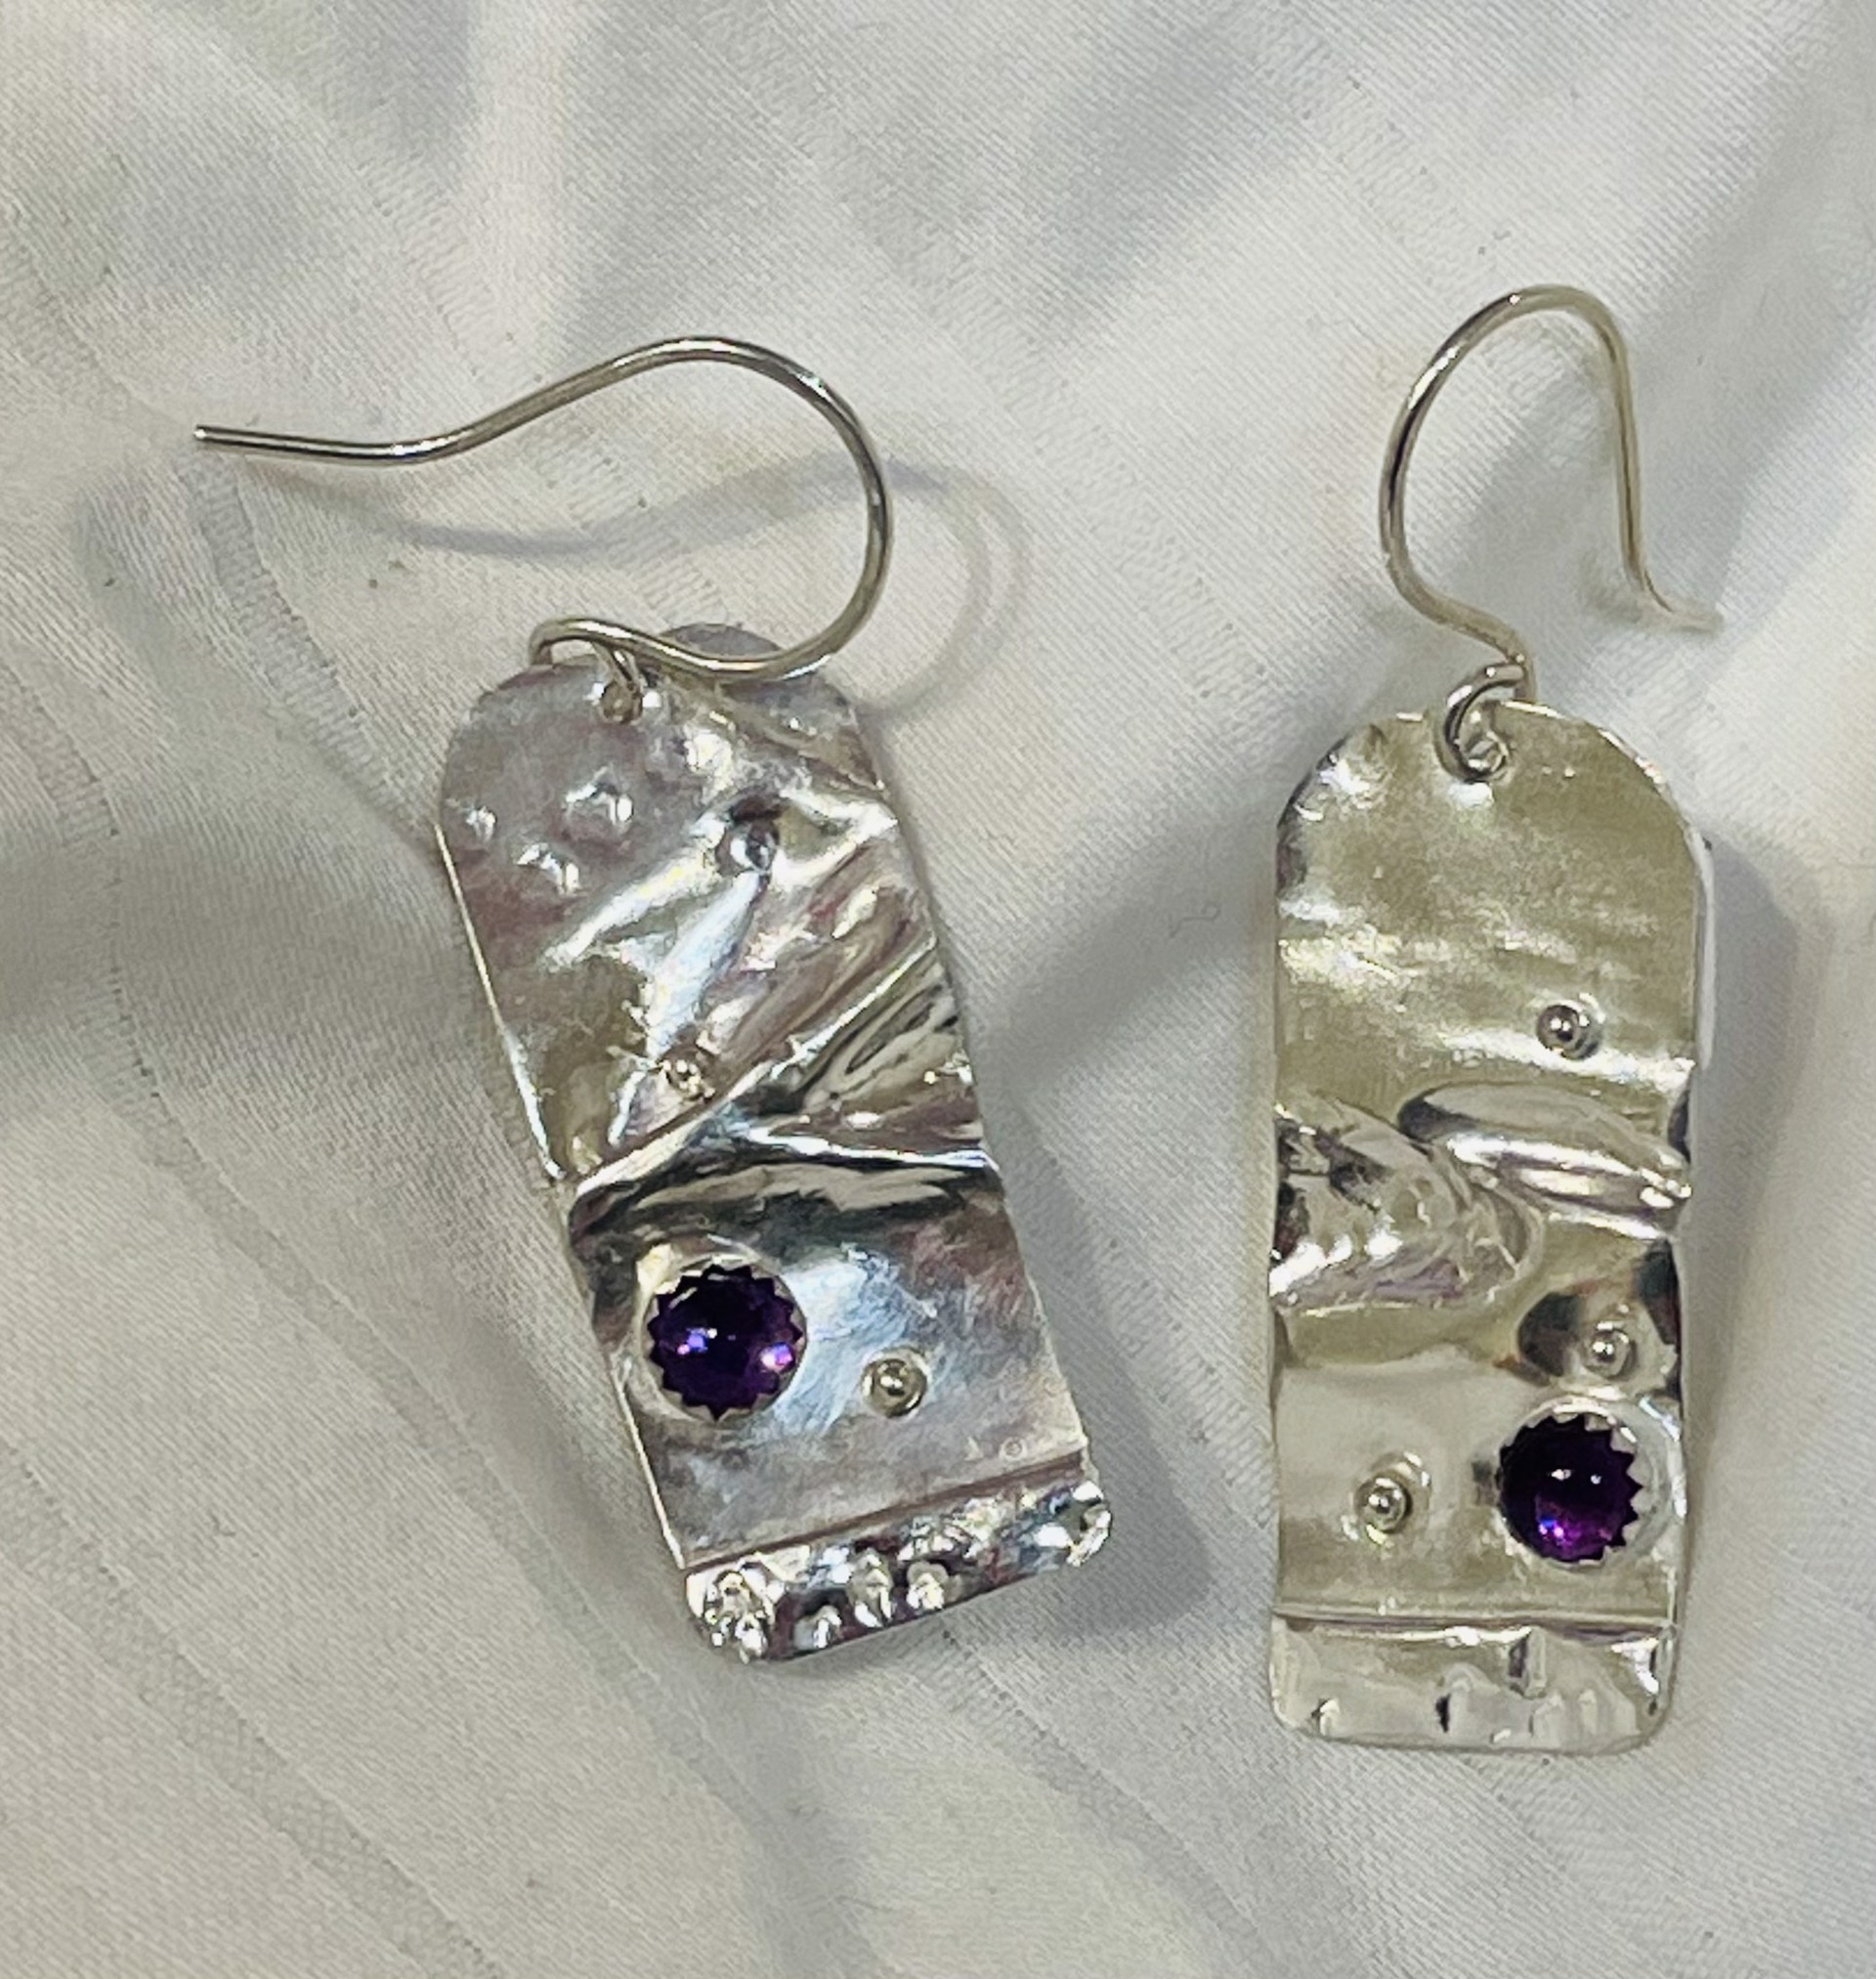 Sterling Silver Fold Formed and Hammered Earrings With Amethyst Cabochons DK2848 by Doris King